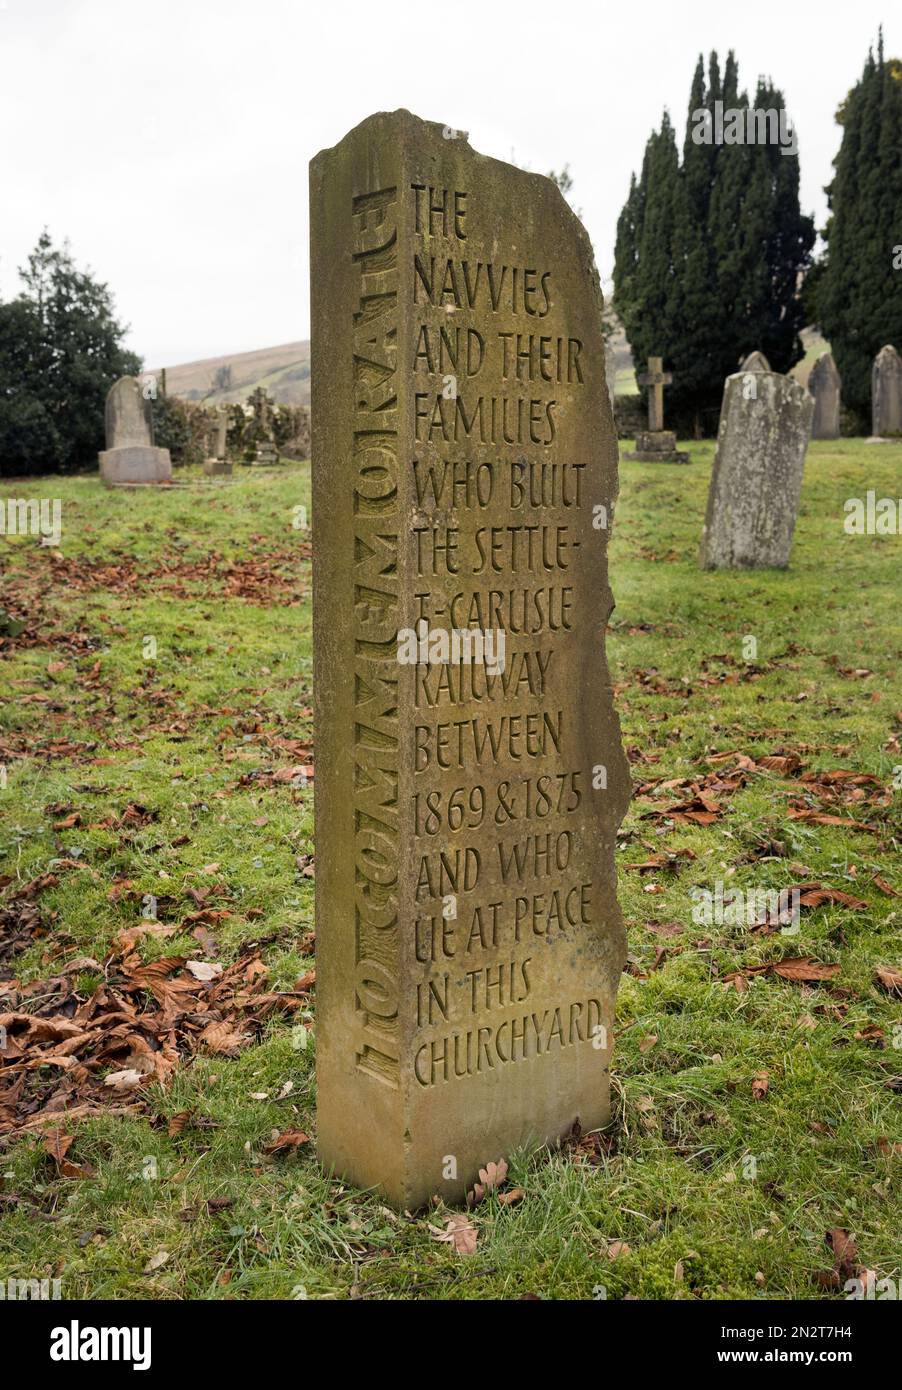 Memorial to the railway navvies and their families who died during the building of the Settle-Carlisle line, Cowgill Churchyard, Dentdale, Cumbria. Stock Photo